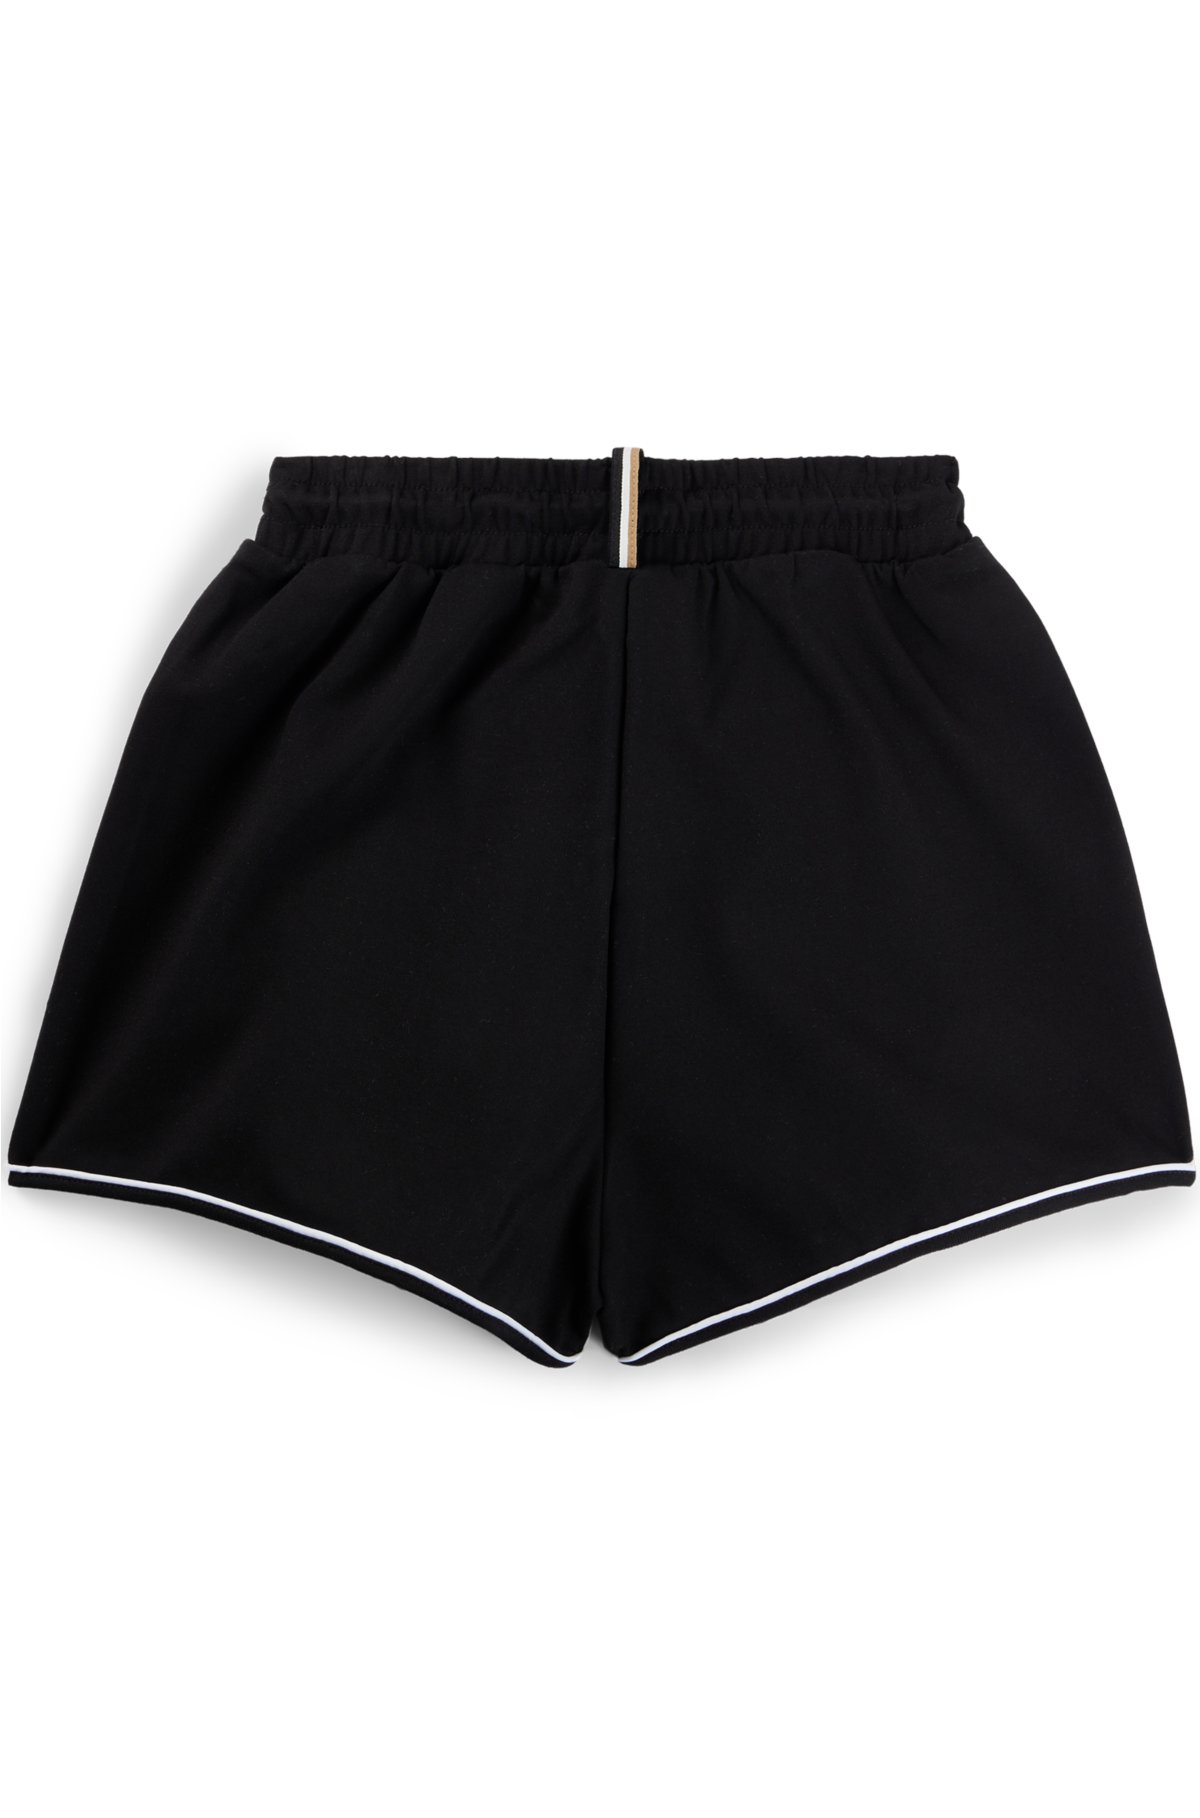 Kids' shorts in stretch fabric with piping and logo, Black